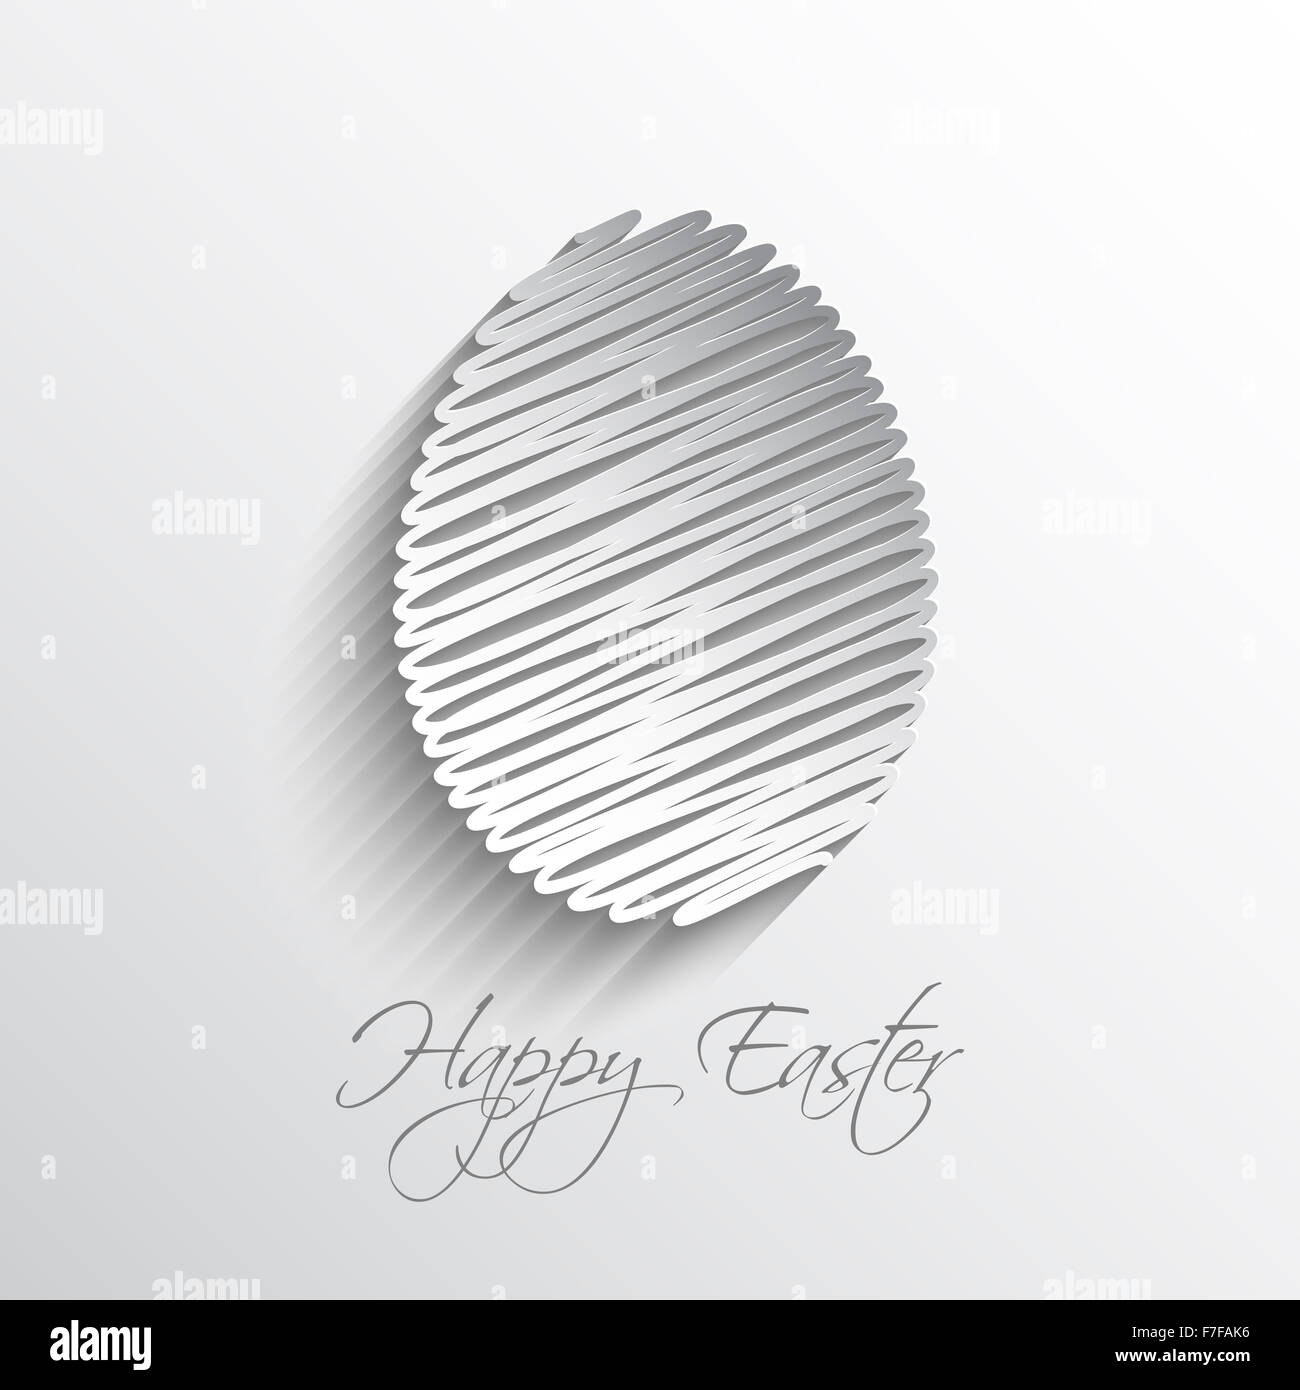 Easter background with scribble design Stock Photo